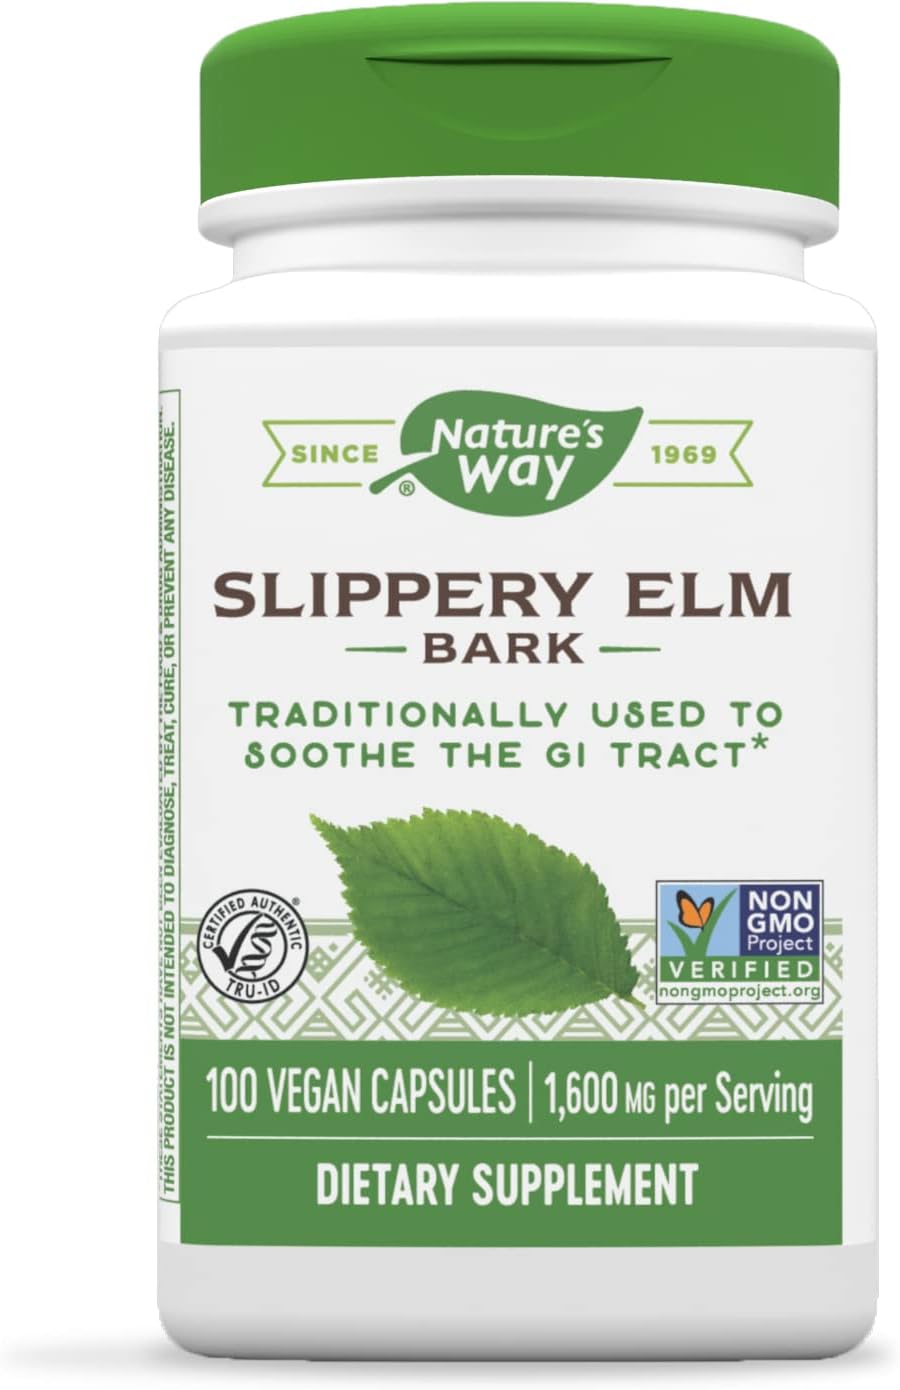 Natures Way Slippery Elm Bark, Traditional Support to Soothe GI Tract*, 100 Vegan Capsules